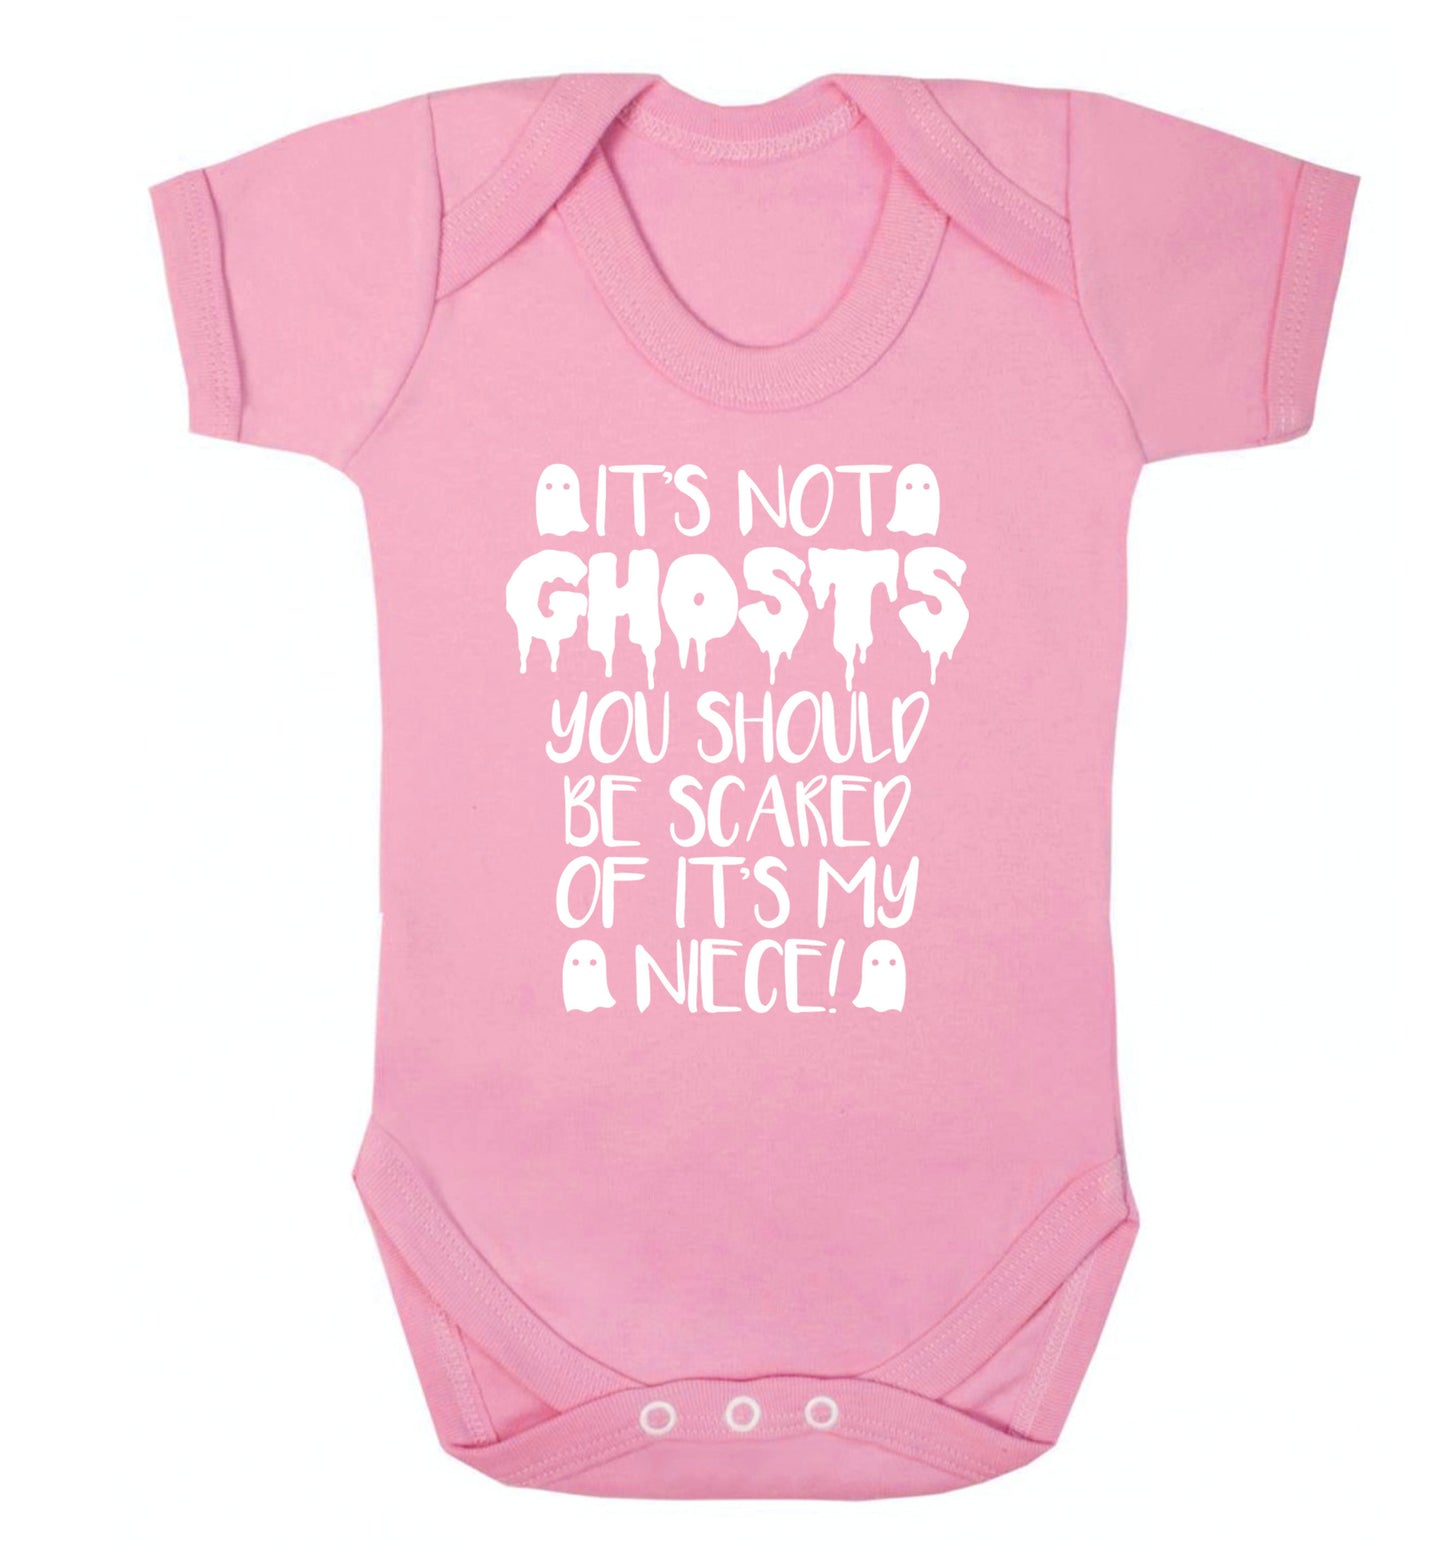 It's not ghosts you should be scared of it's my niece! Baby Vest pale pink 18-24 months